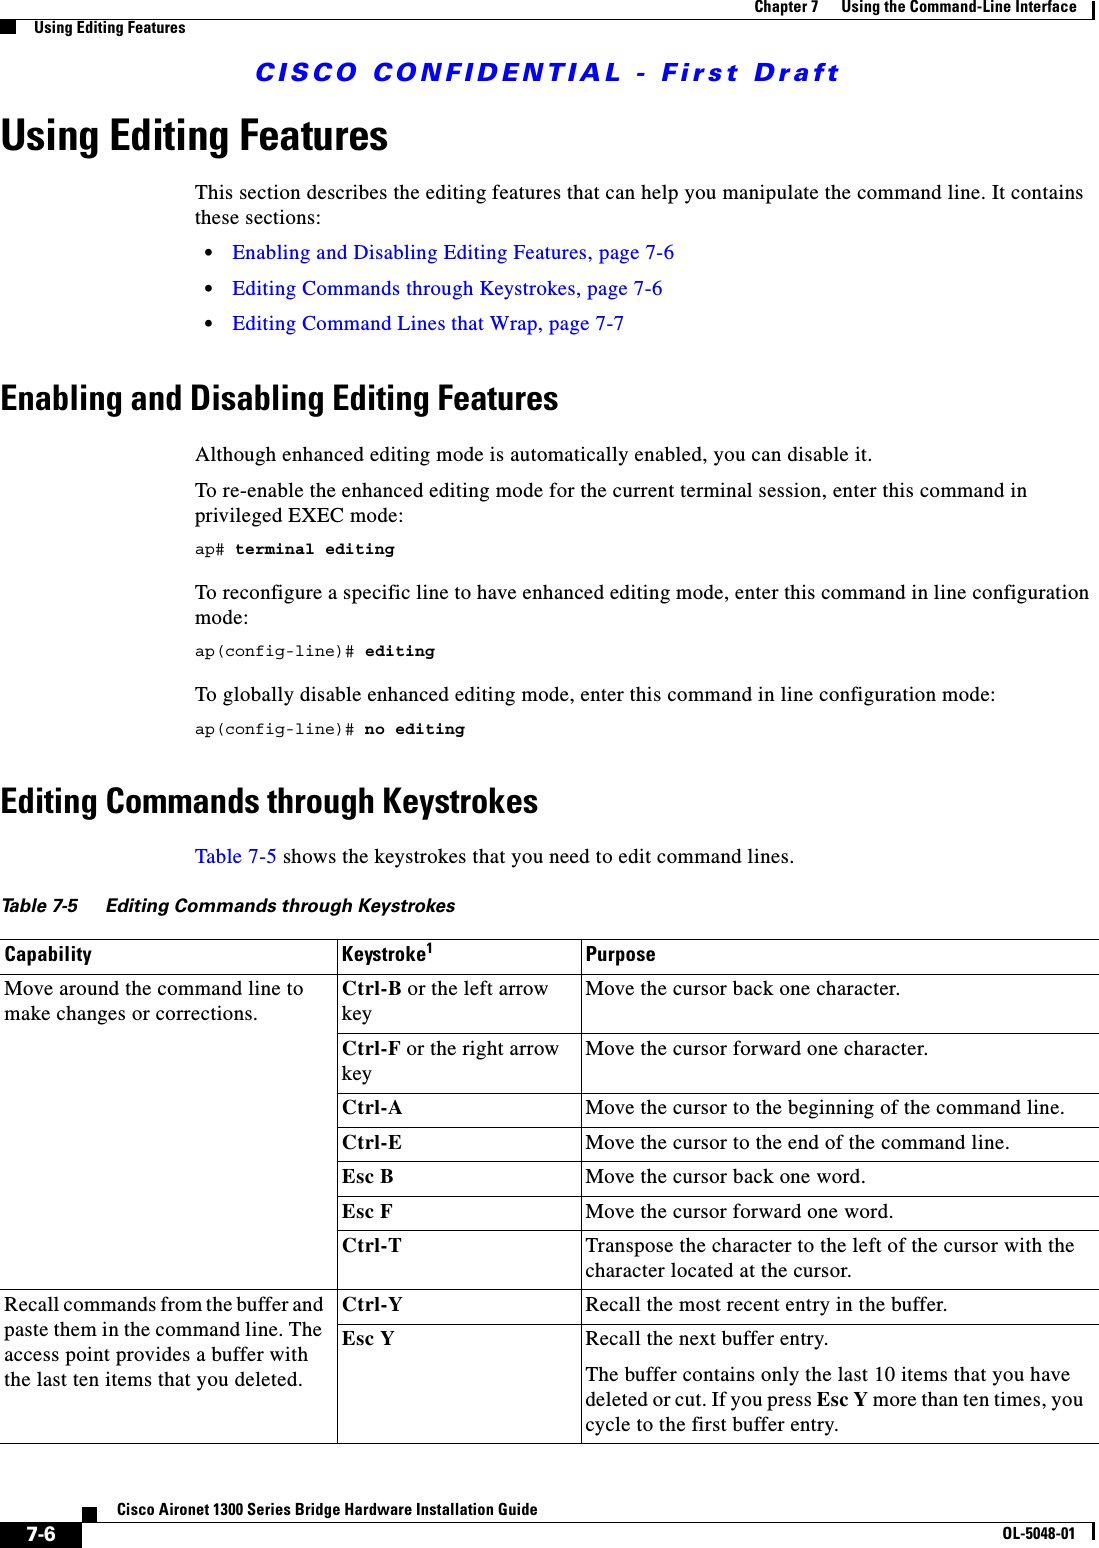 CISCO CONFIDENTIAL - First Draft7-6Cisco Aironet 1300 Series Bridge Hardware Installation GuideOL-5048-01Chapter 7      Using the Command-Line InterfaceUsing Editing FeaturesUsing Editing FeaturesThis section describes the editing features that can help you manipulate the command line. It contains these sections:•Enabling and Disabling Editing Features, page 7-6•Editing Commands through Keystrokes, page 7-6•Editing Command Lines that Wrap, page 7-7Enabling and Disabling Editing FeaturesAlthough enhanced editing mode is automatically enabled, you can disable it.To re-enable the enhanced editing mode for the current terminal session, enter this command in privileged EXEC mode: ap# terminal editingTo reconfigure a specific line to have enhanced editing mode, enter this command in line configuration mode: ap(config-line)# editingTo globally disable enhanced editing mode, enter this command in line configuration mode: ap(config-line)# no editingEditing Commands through KeystrokesTable 7-5 shows the keystrokes that you need to edit command lines.Table 7-5 Editing Commands through KeystrokesCapability Keystroke1PurposeMove around the command line to make changes or corrections.Ctrl-B or the left arrow keyMove the cursor back one character. Ctrl-F or the right arrow keyMove the cursor forward one character. Ctrl-A Move the cursor to the beginning of the command line.Ctrl-E Move the cursor to the end of the command line.Esc B Move the cursor back one word.Esc F Move the cursor forward one word.Ctrl-T Transpose the character to the left of the cursor with the character located at the cursor.Recall commands from the buffer and paste them in the command line. The access point provides a buffer with the last ten items that you deleted.Ctrl-Y Recall the most recent entry in the buffer.Esc Y Recall the next buffer entry.The buffer contains only the last 10 items that you have deleted or cut. If you press Esc Y more than ten times, you cycle to the first buffer entry.